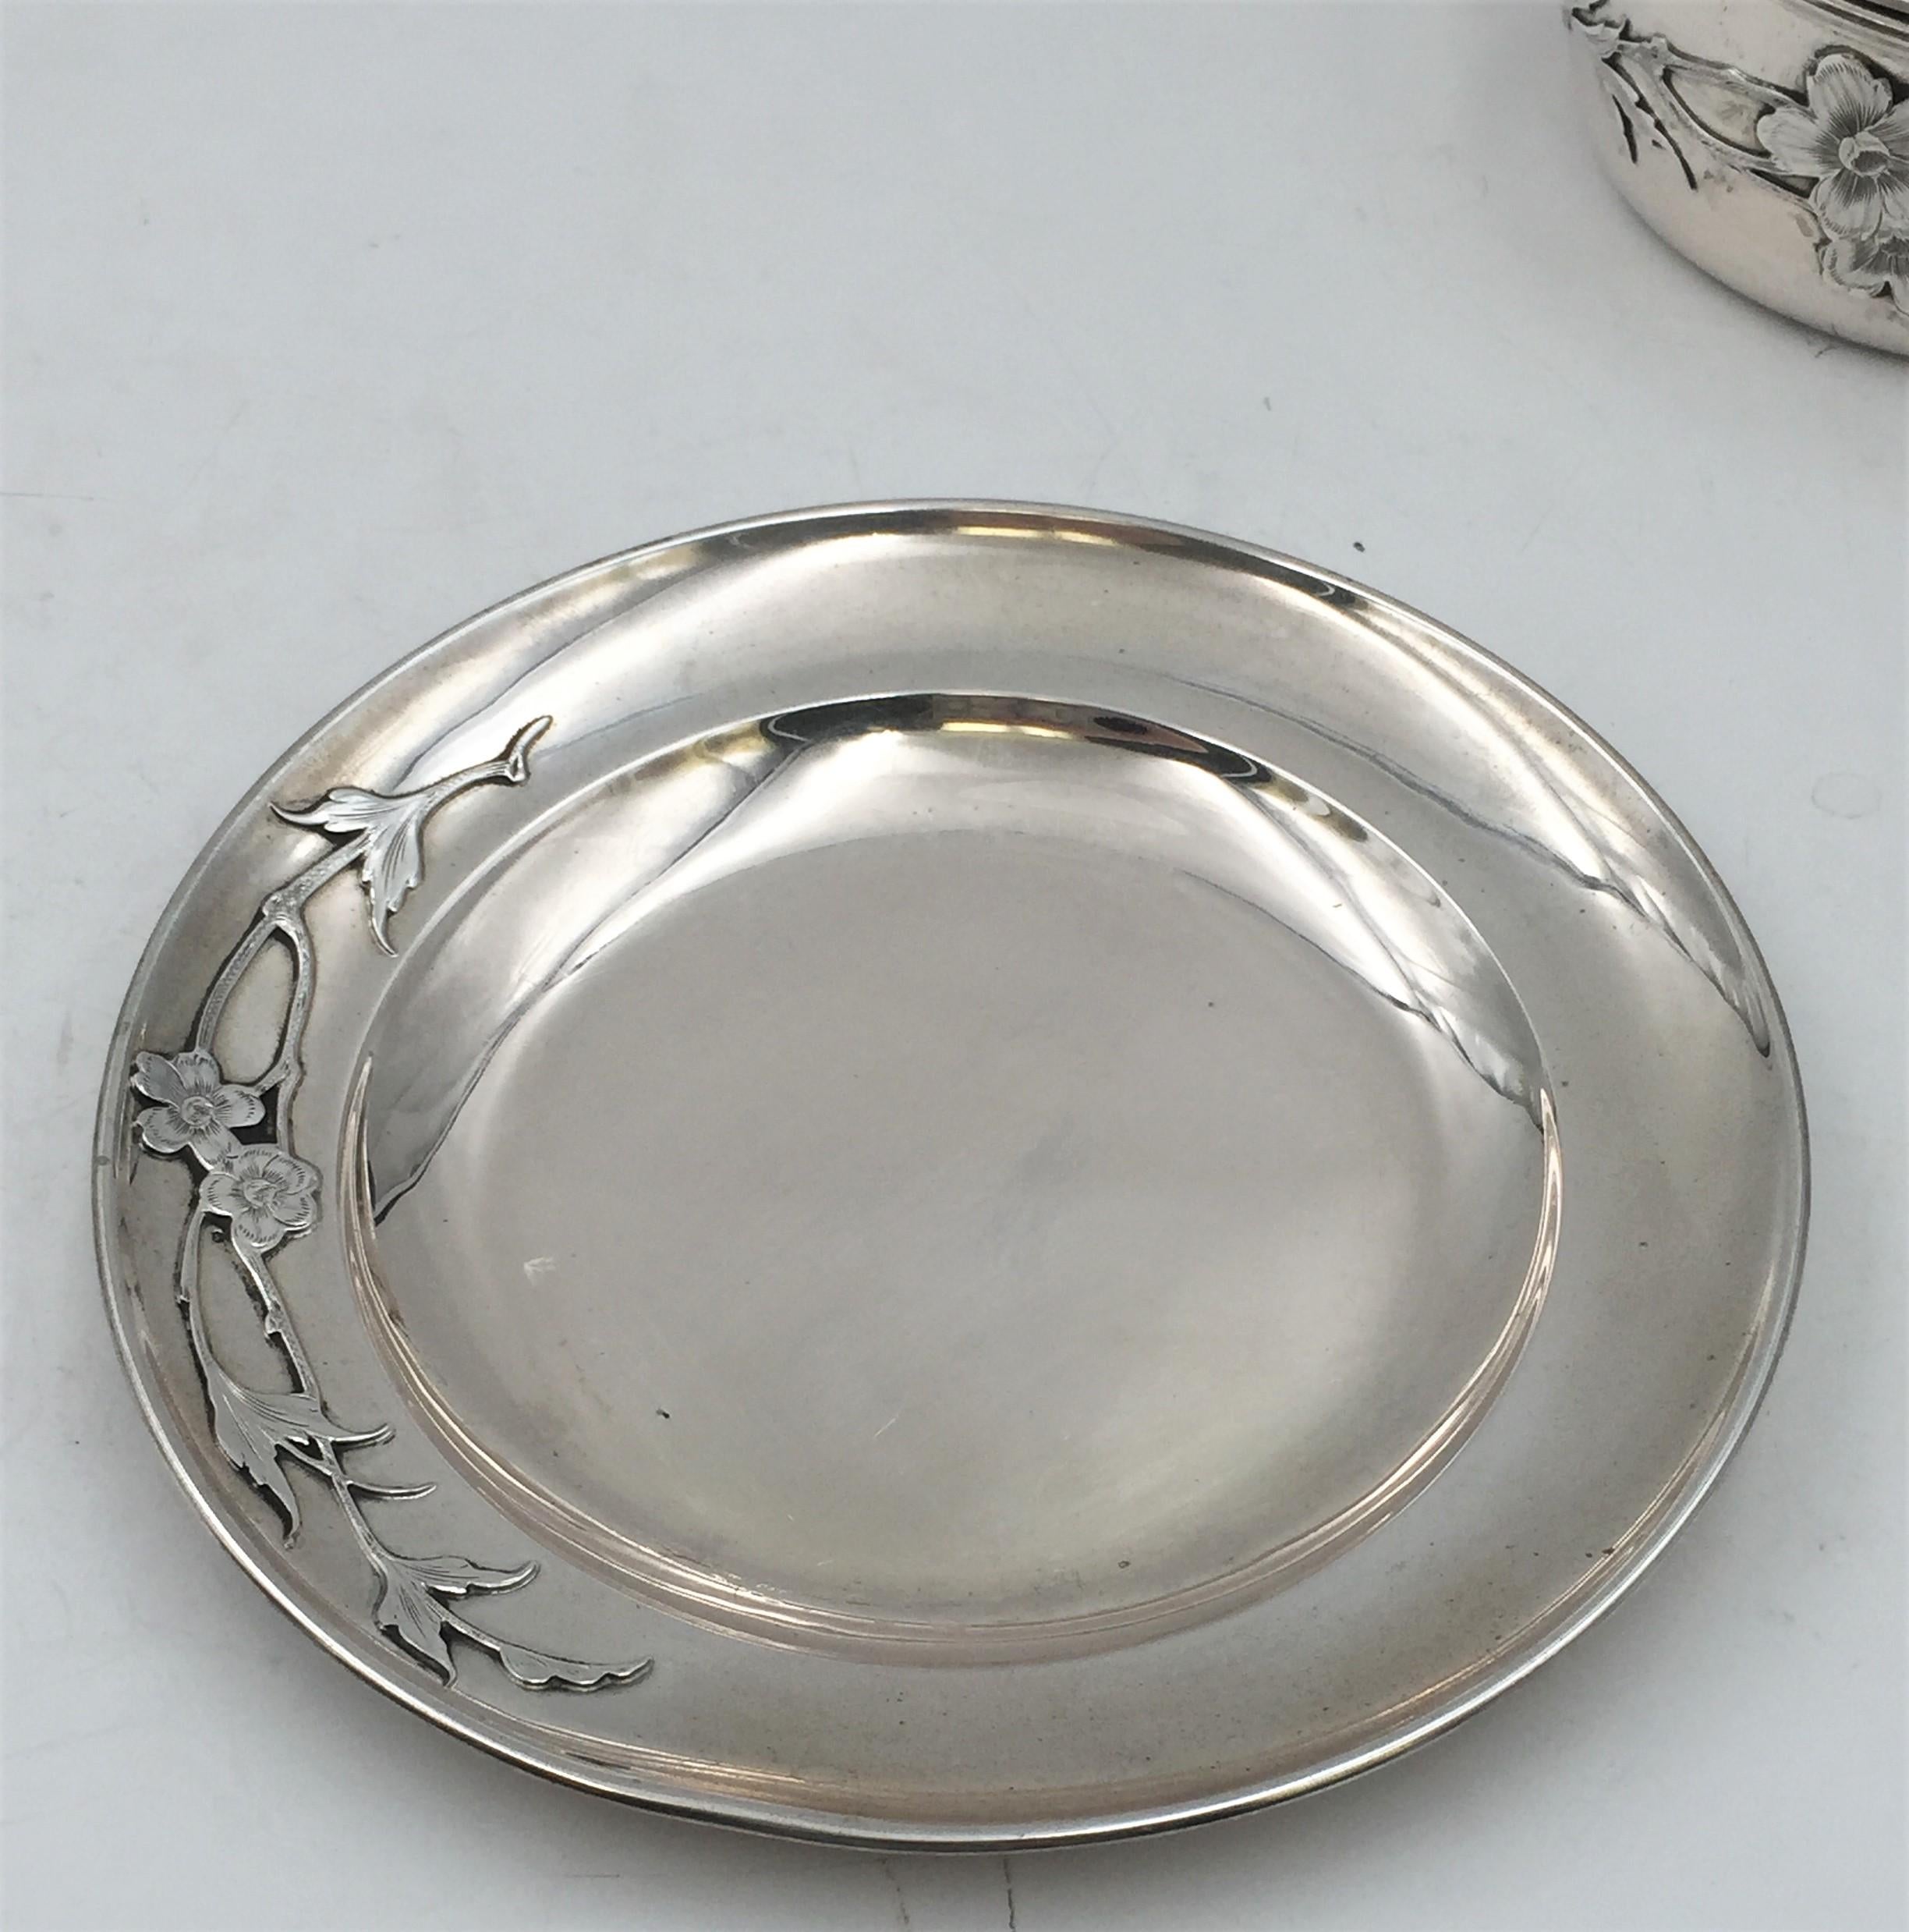 19th century German continental silver butter dish and covered bowl/ tureen in exquisite Art Nouveau style with applied floral decorations. The two-handled bowl is gilt inside and has a wood finial atop. The dish measures 6 3/4” in diameter by 2/3”